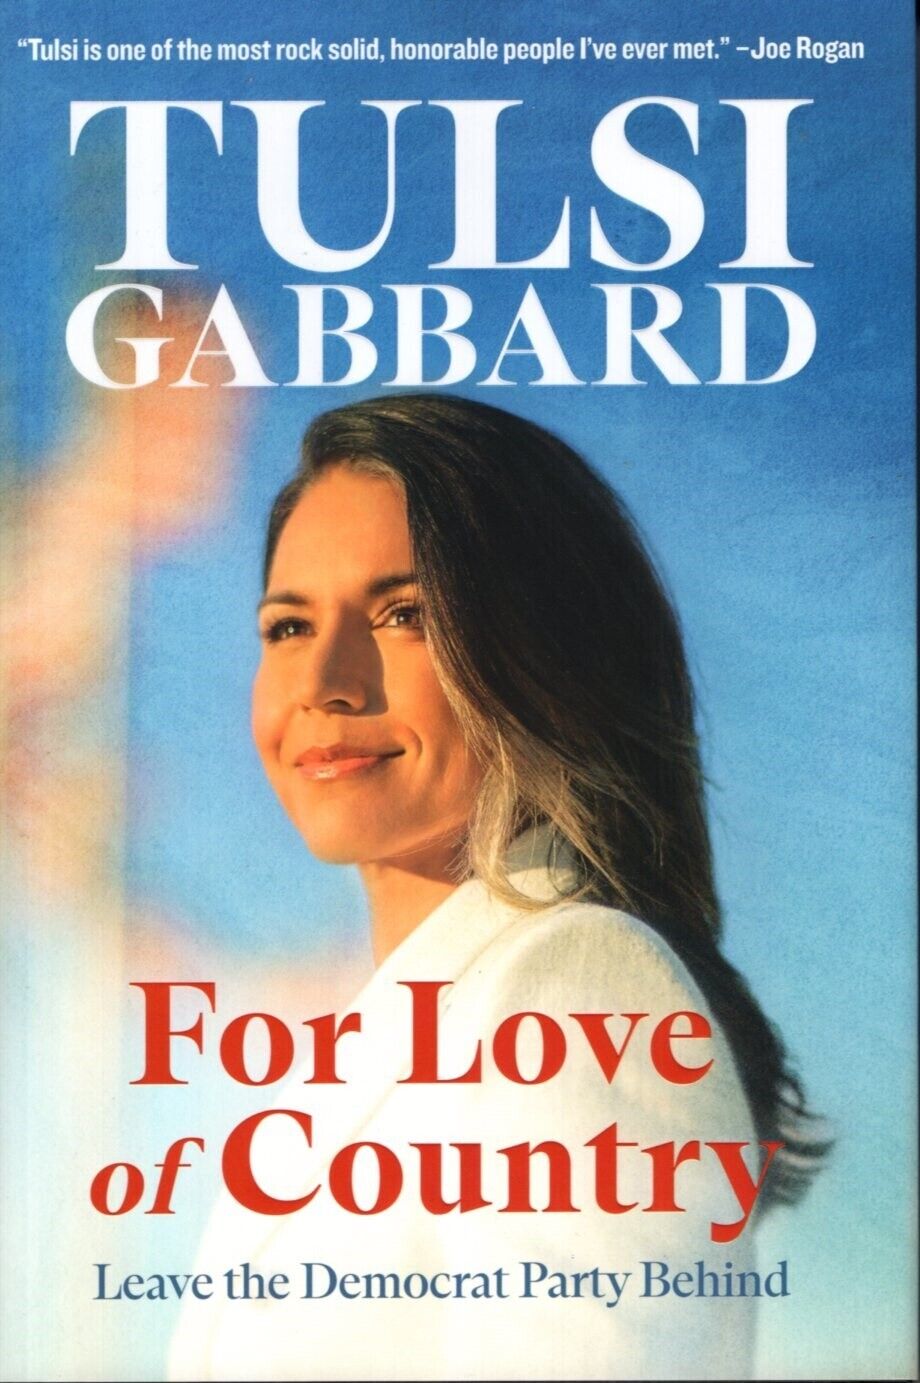 TULSI GABBARD signed autographed 1st edition book